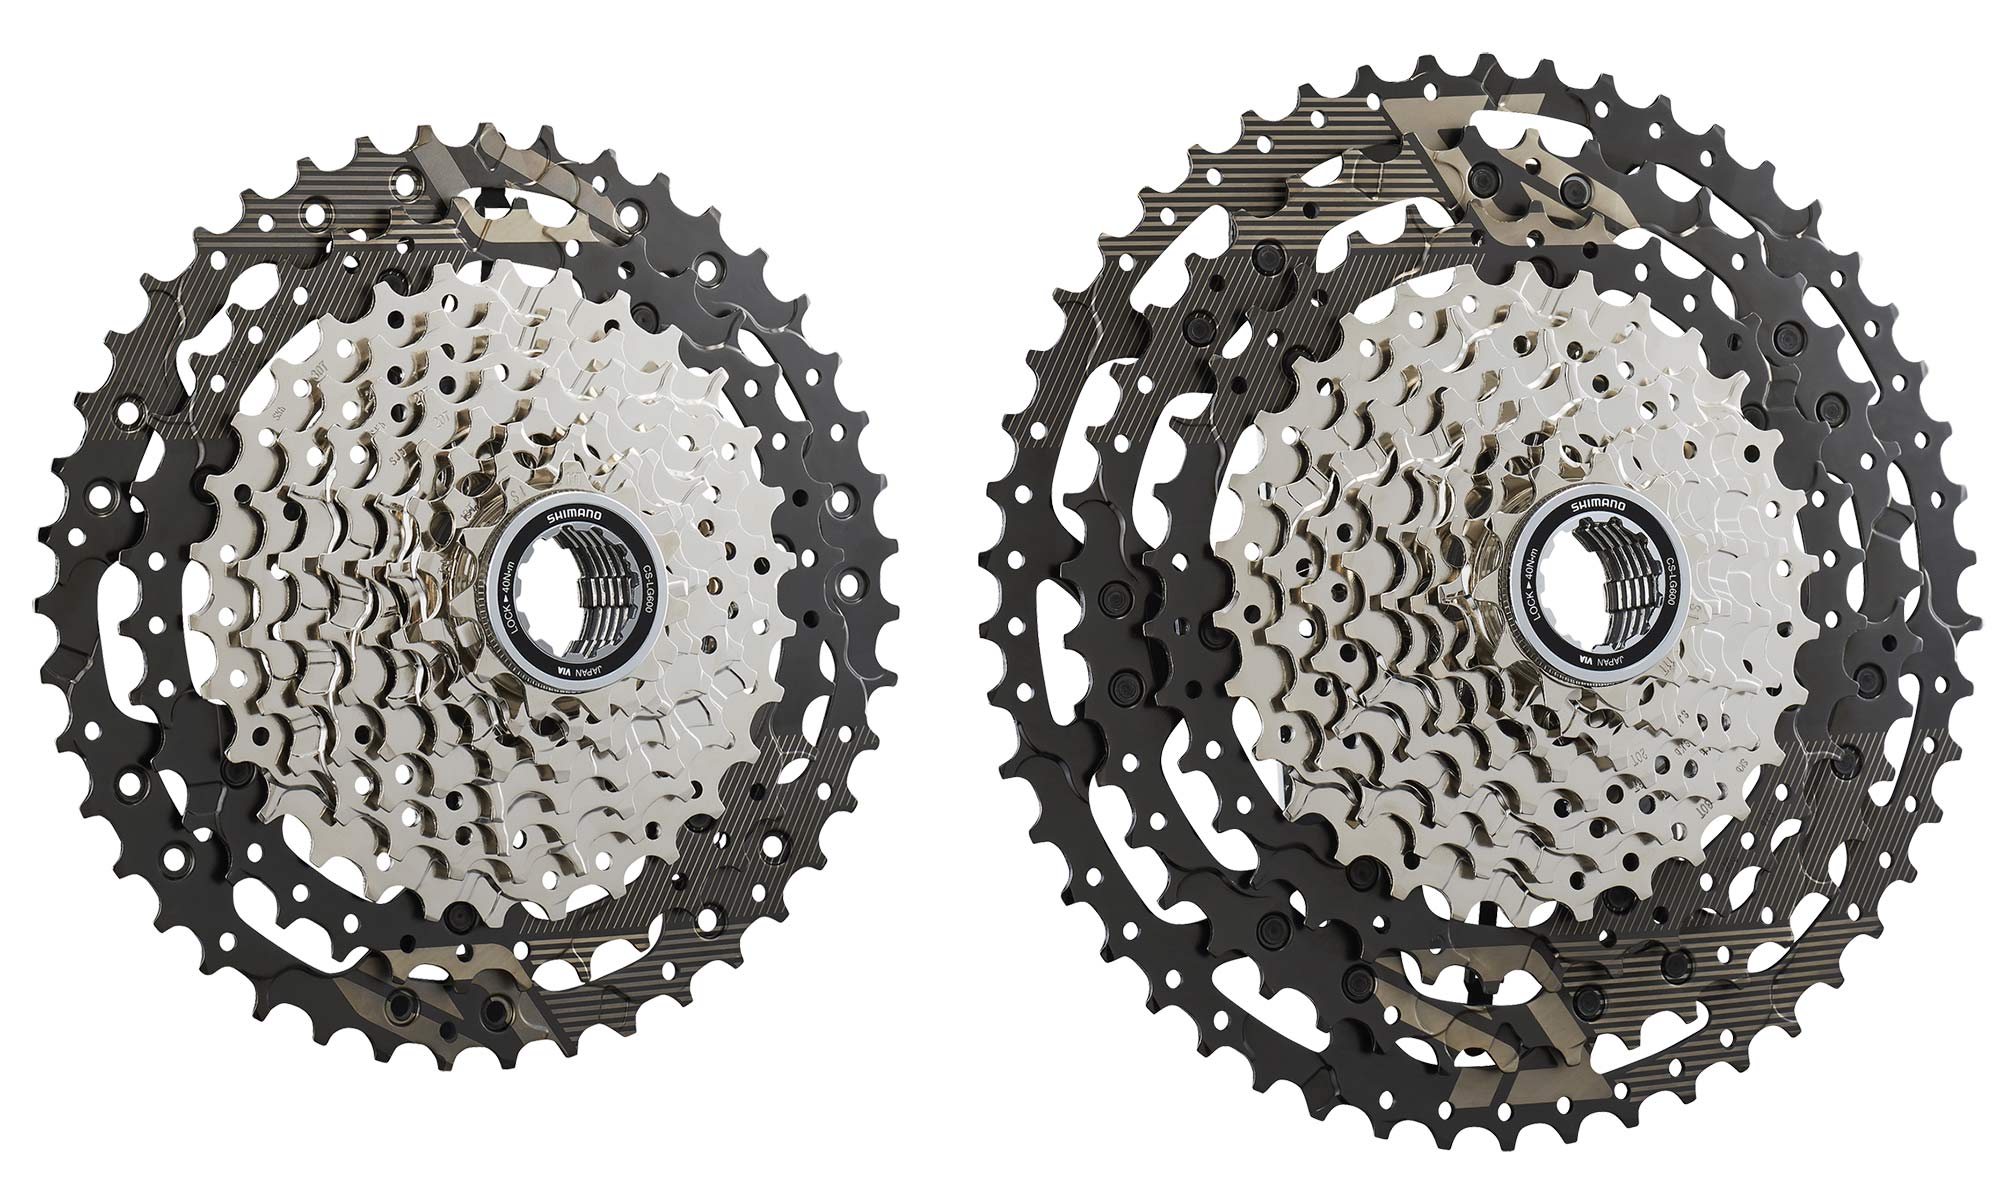 Shimano Deore XT LinkGlide drivetrain is 3x more durable, new LG MTB long-wearing mountain bike groupset, new cassettes